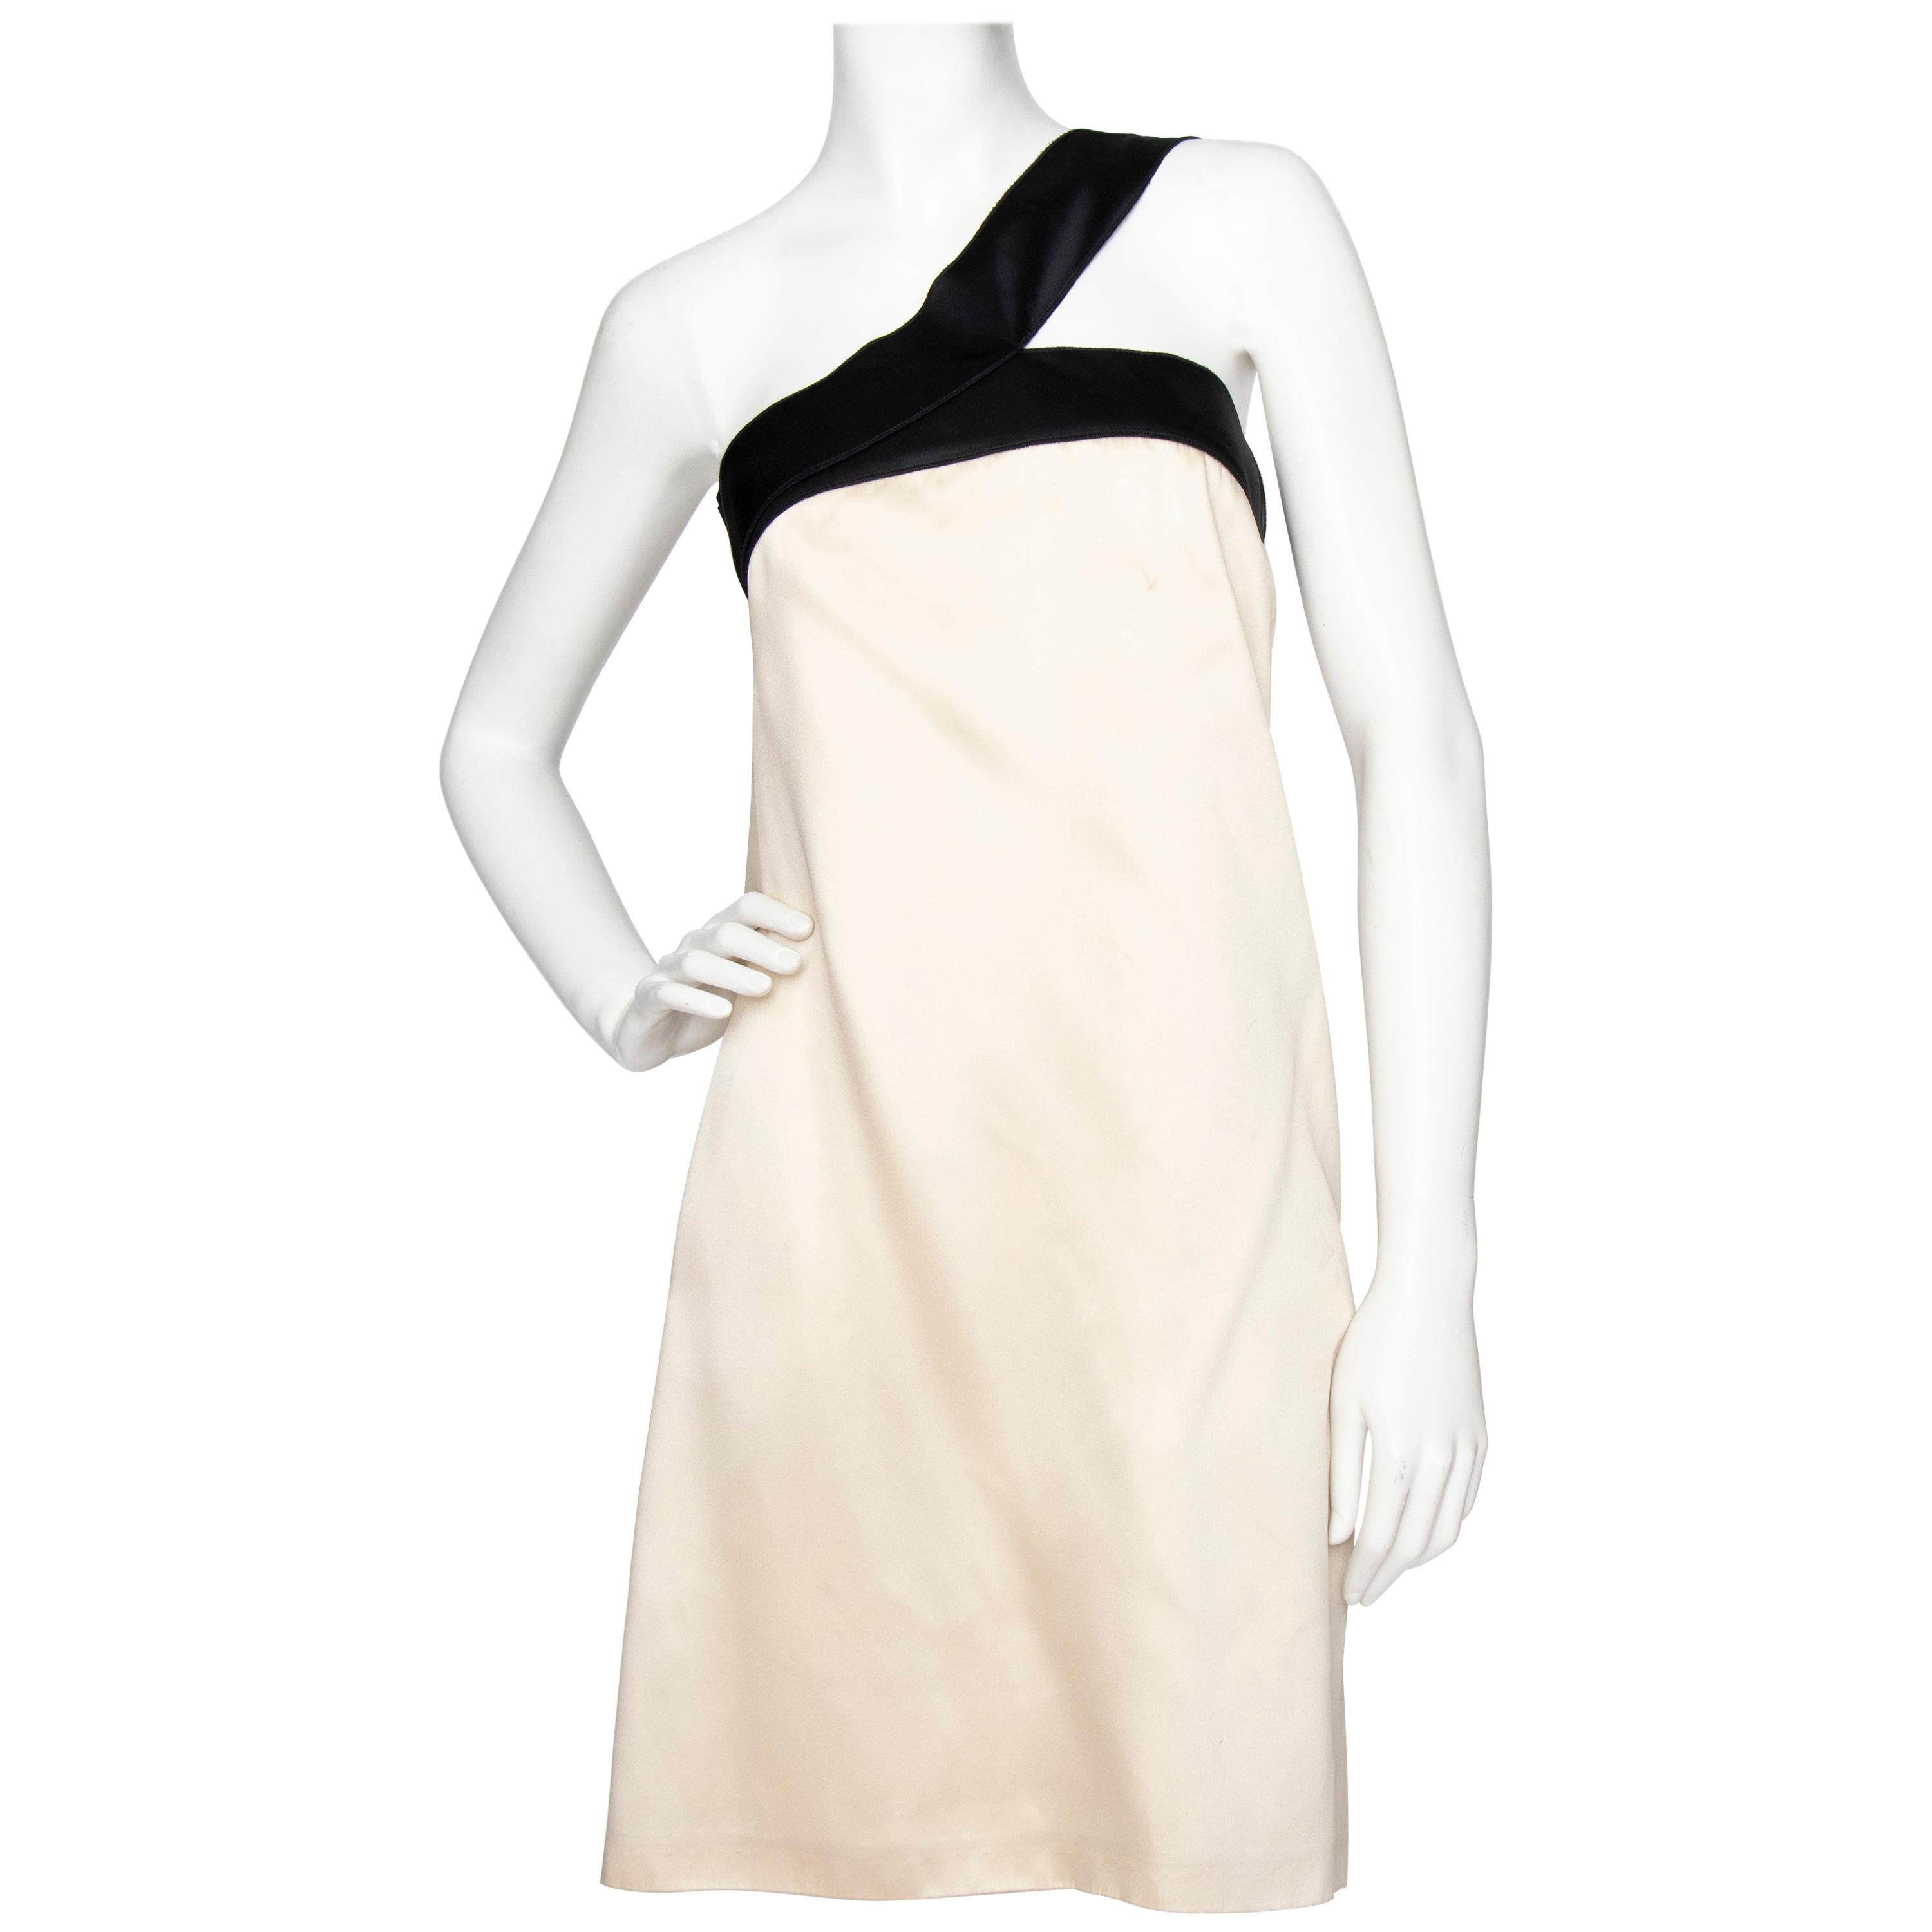 An Early 2000s Vintage D&G by Dolce & Gabbana Ivory Satin Cocktail Dress For Sale